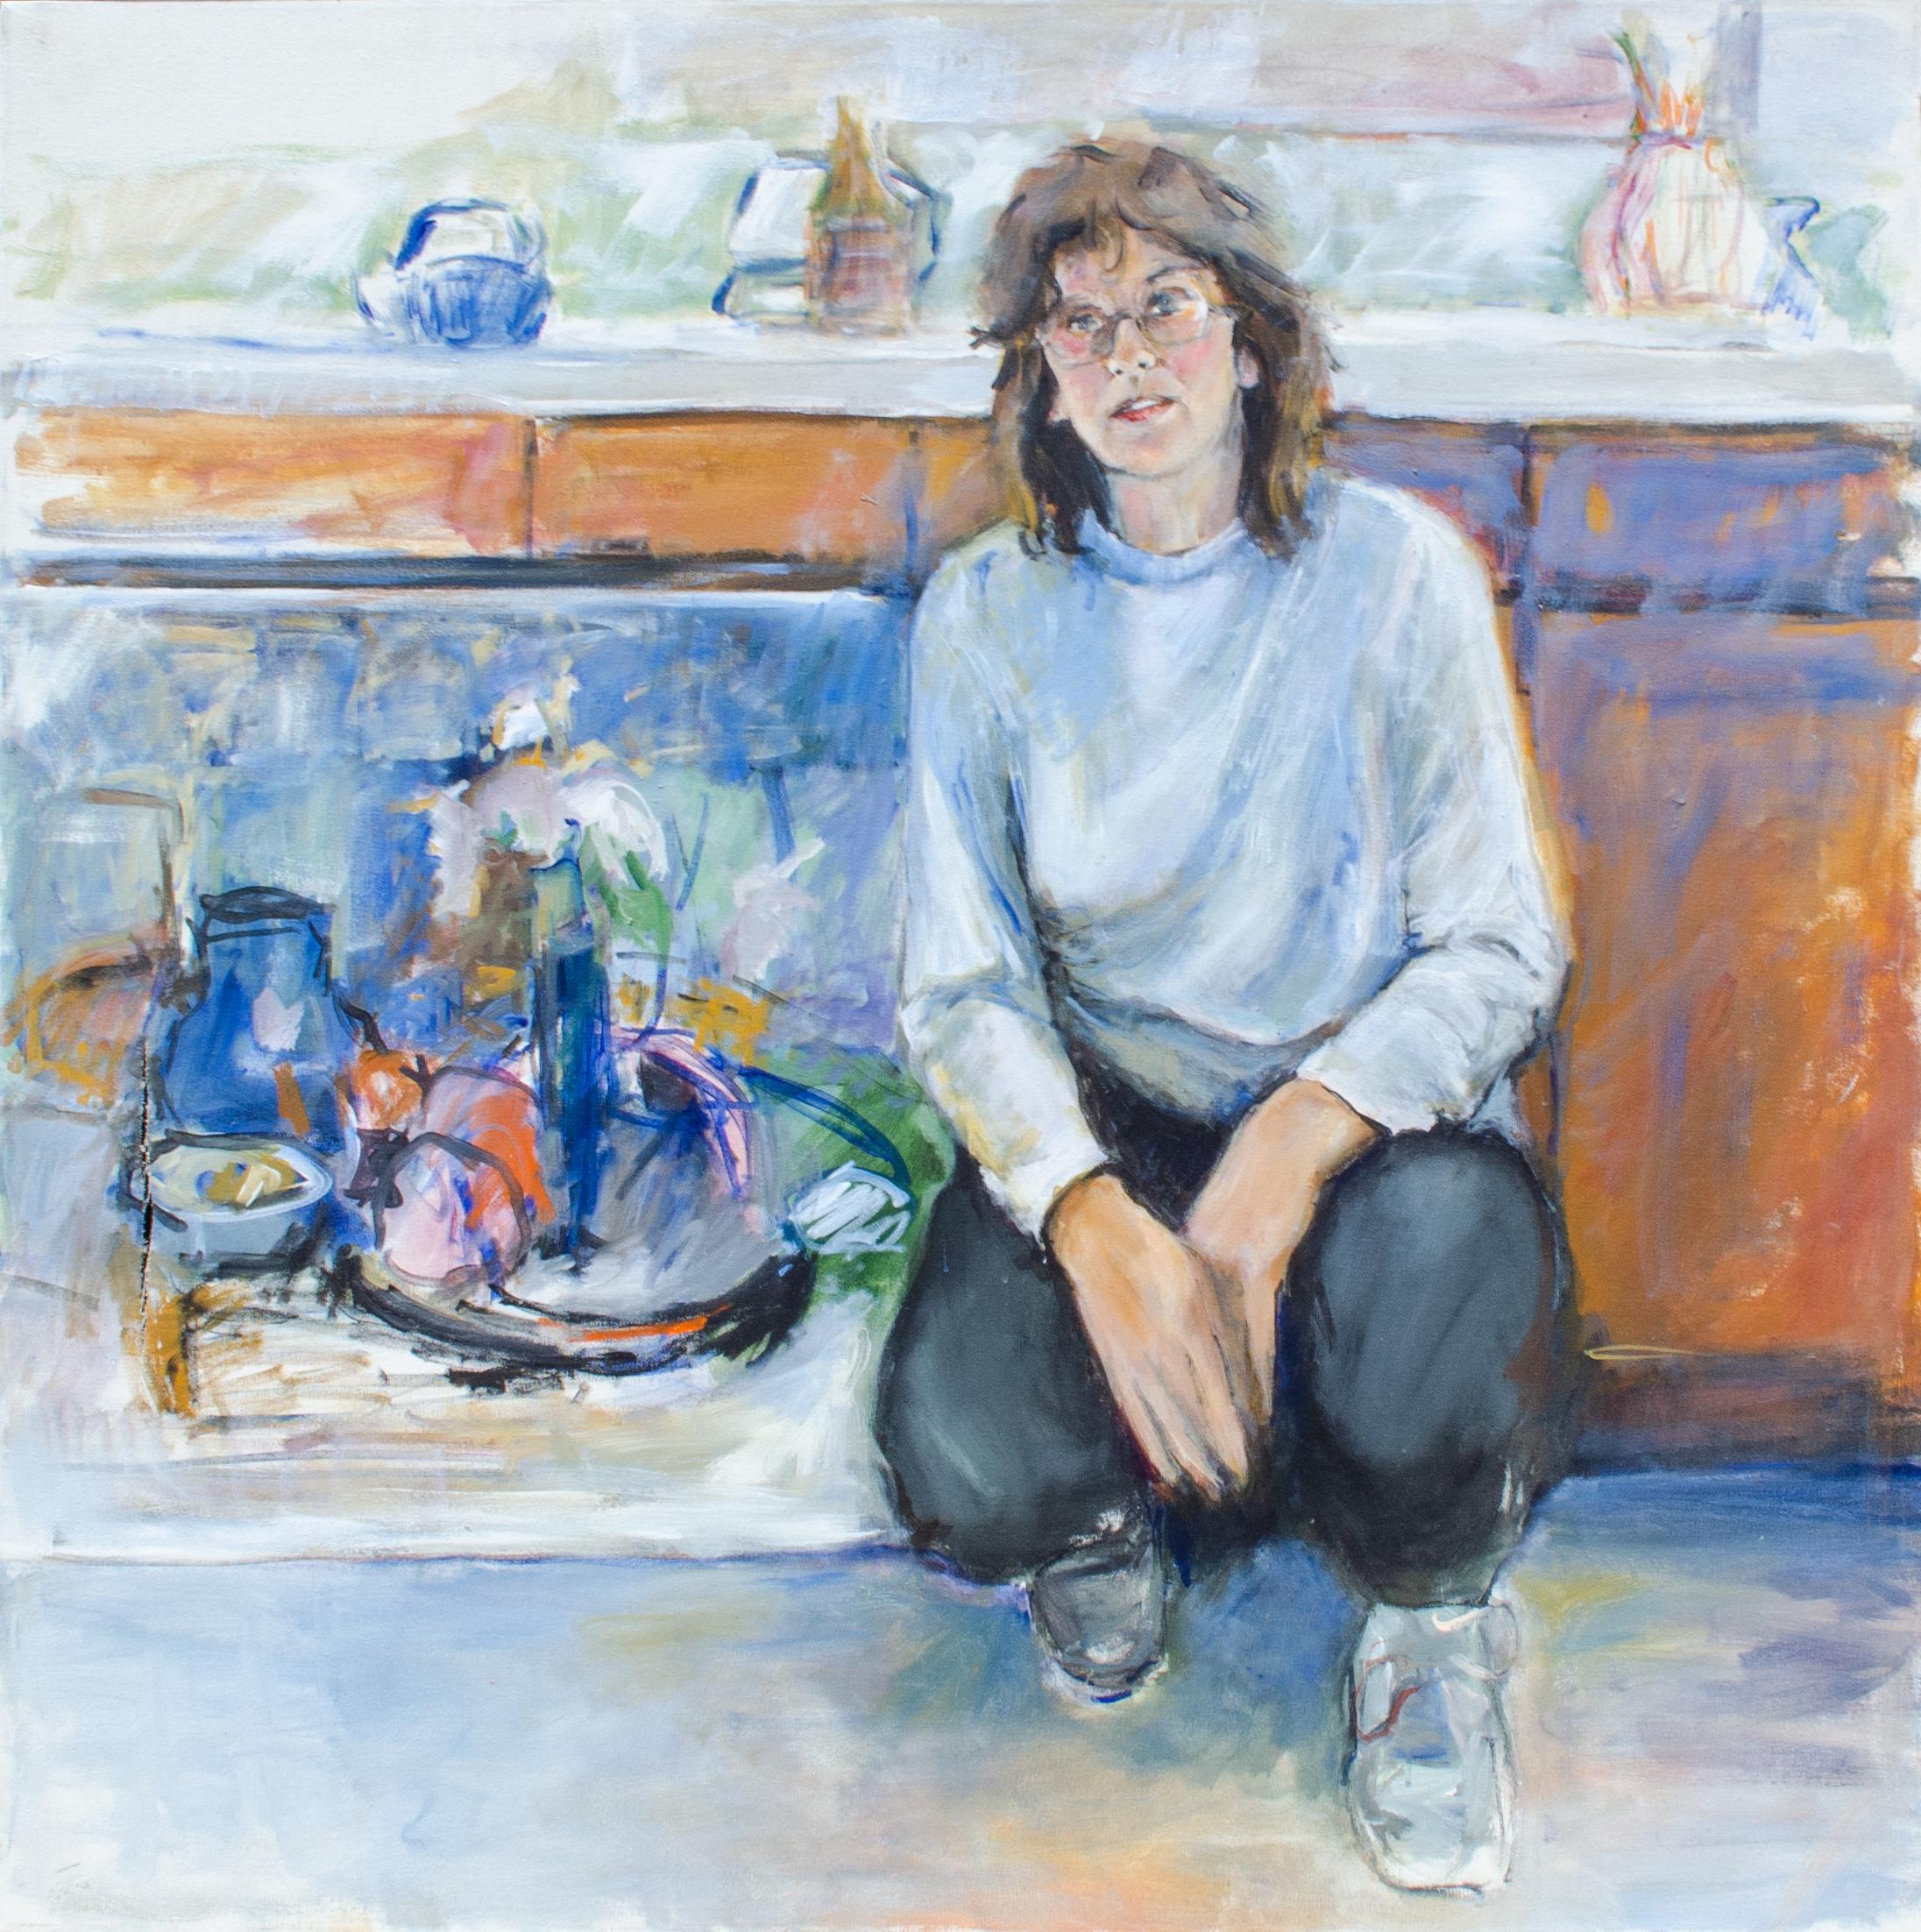 Ethel Pierson (American, 1942-2022)
Self Portrait with Still Life, c. 1990s
Acrylic on canvas
Framed: 40 3/8 x 40 1/2 x 1 1/3 in.
Signed and titled verso

